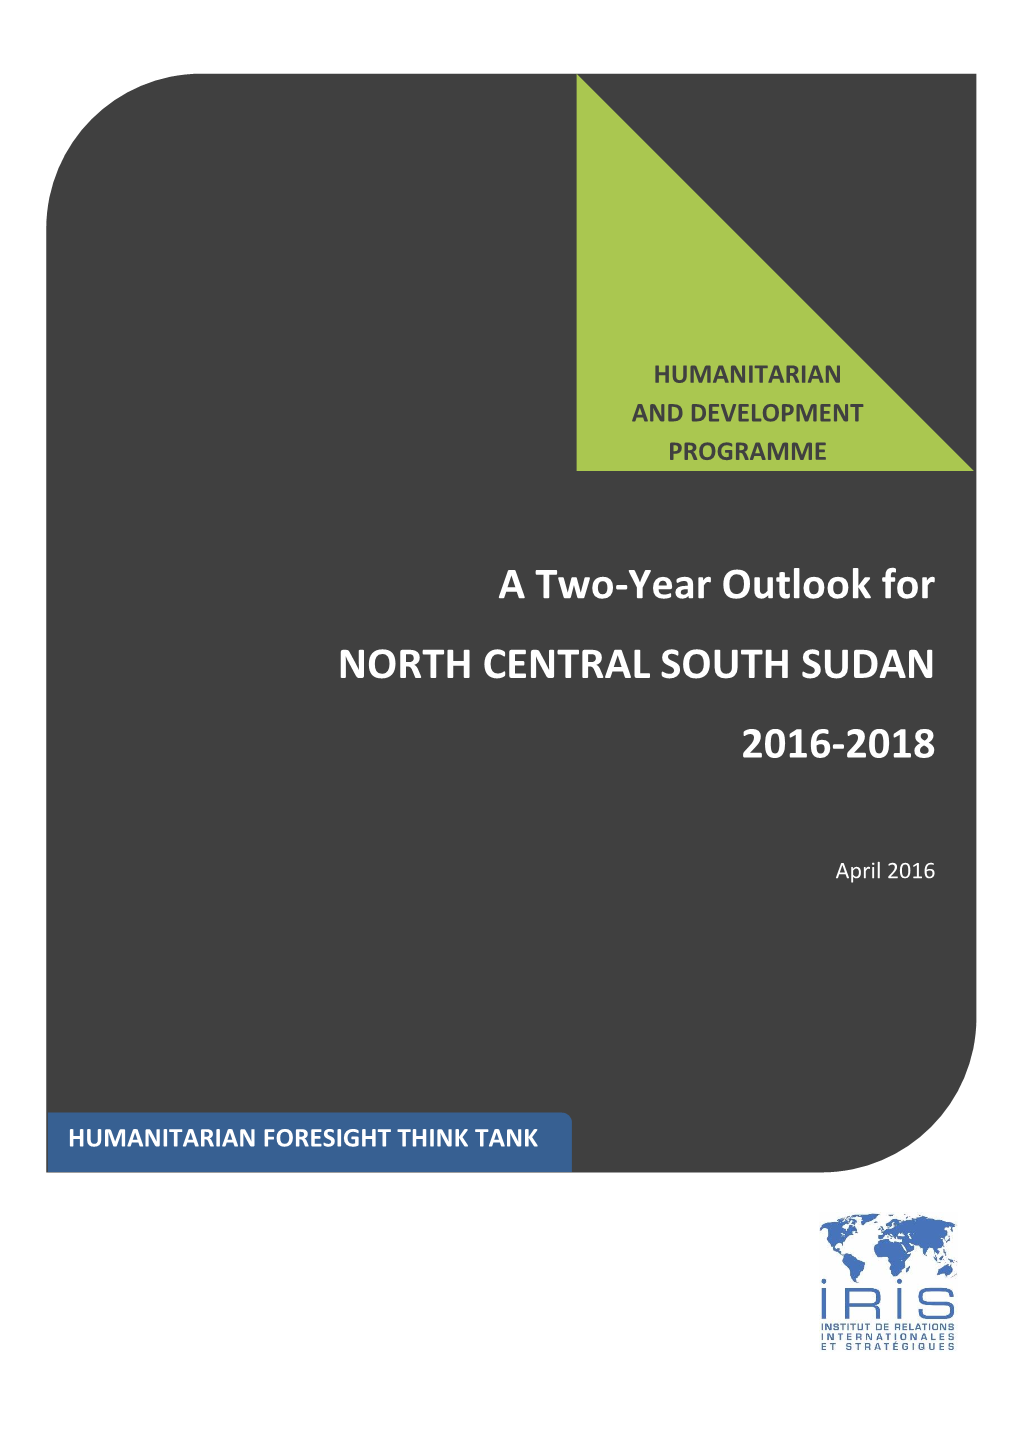 A Two-Year Outlook for NORTH CENTRAL SOUTH SUDAN 2016-2018